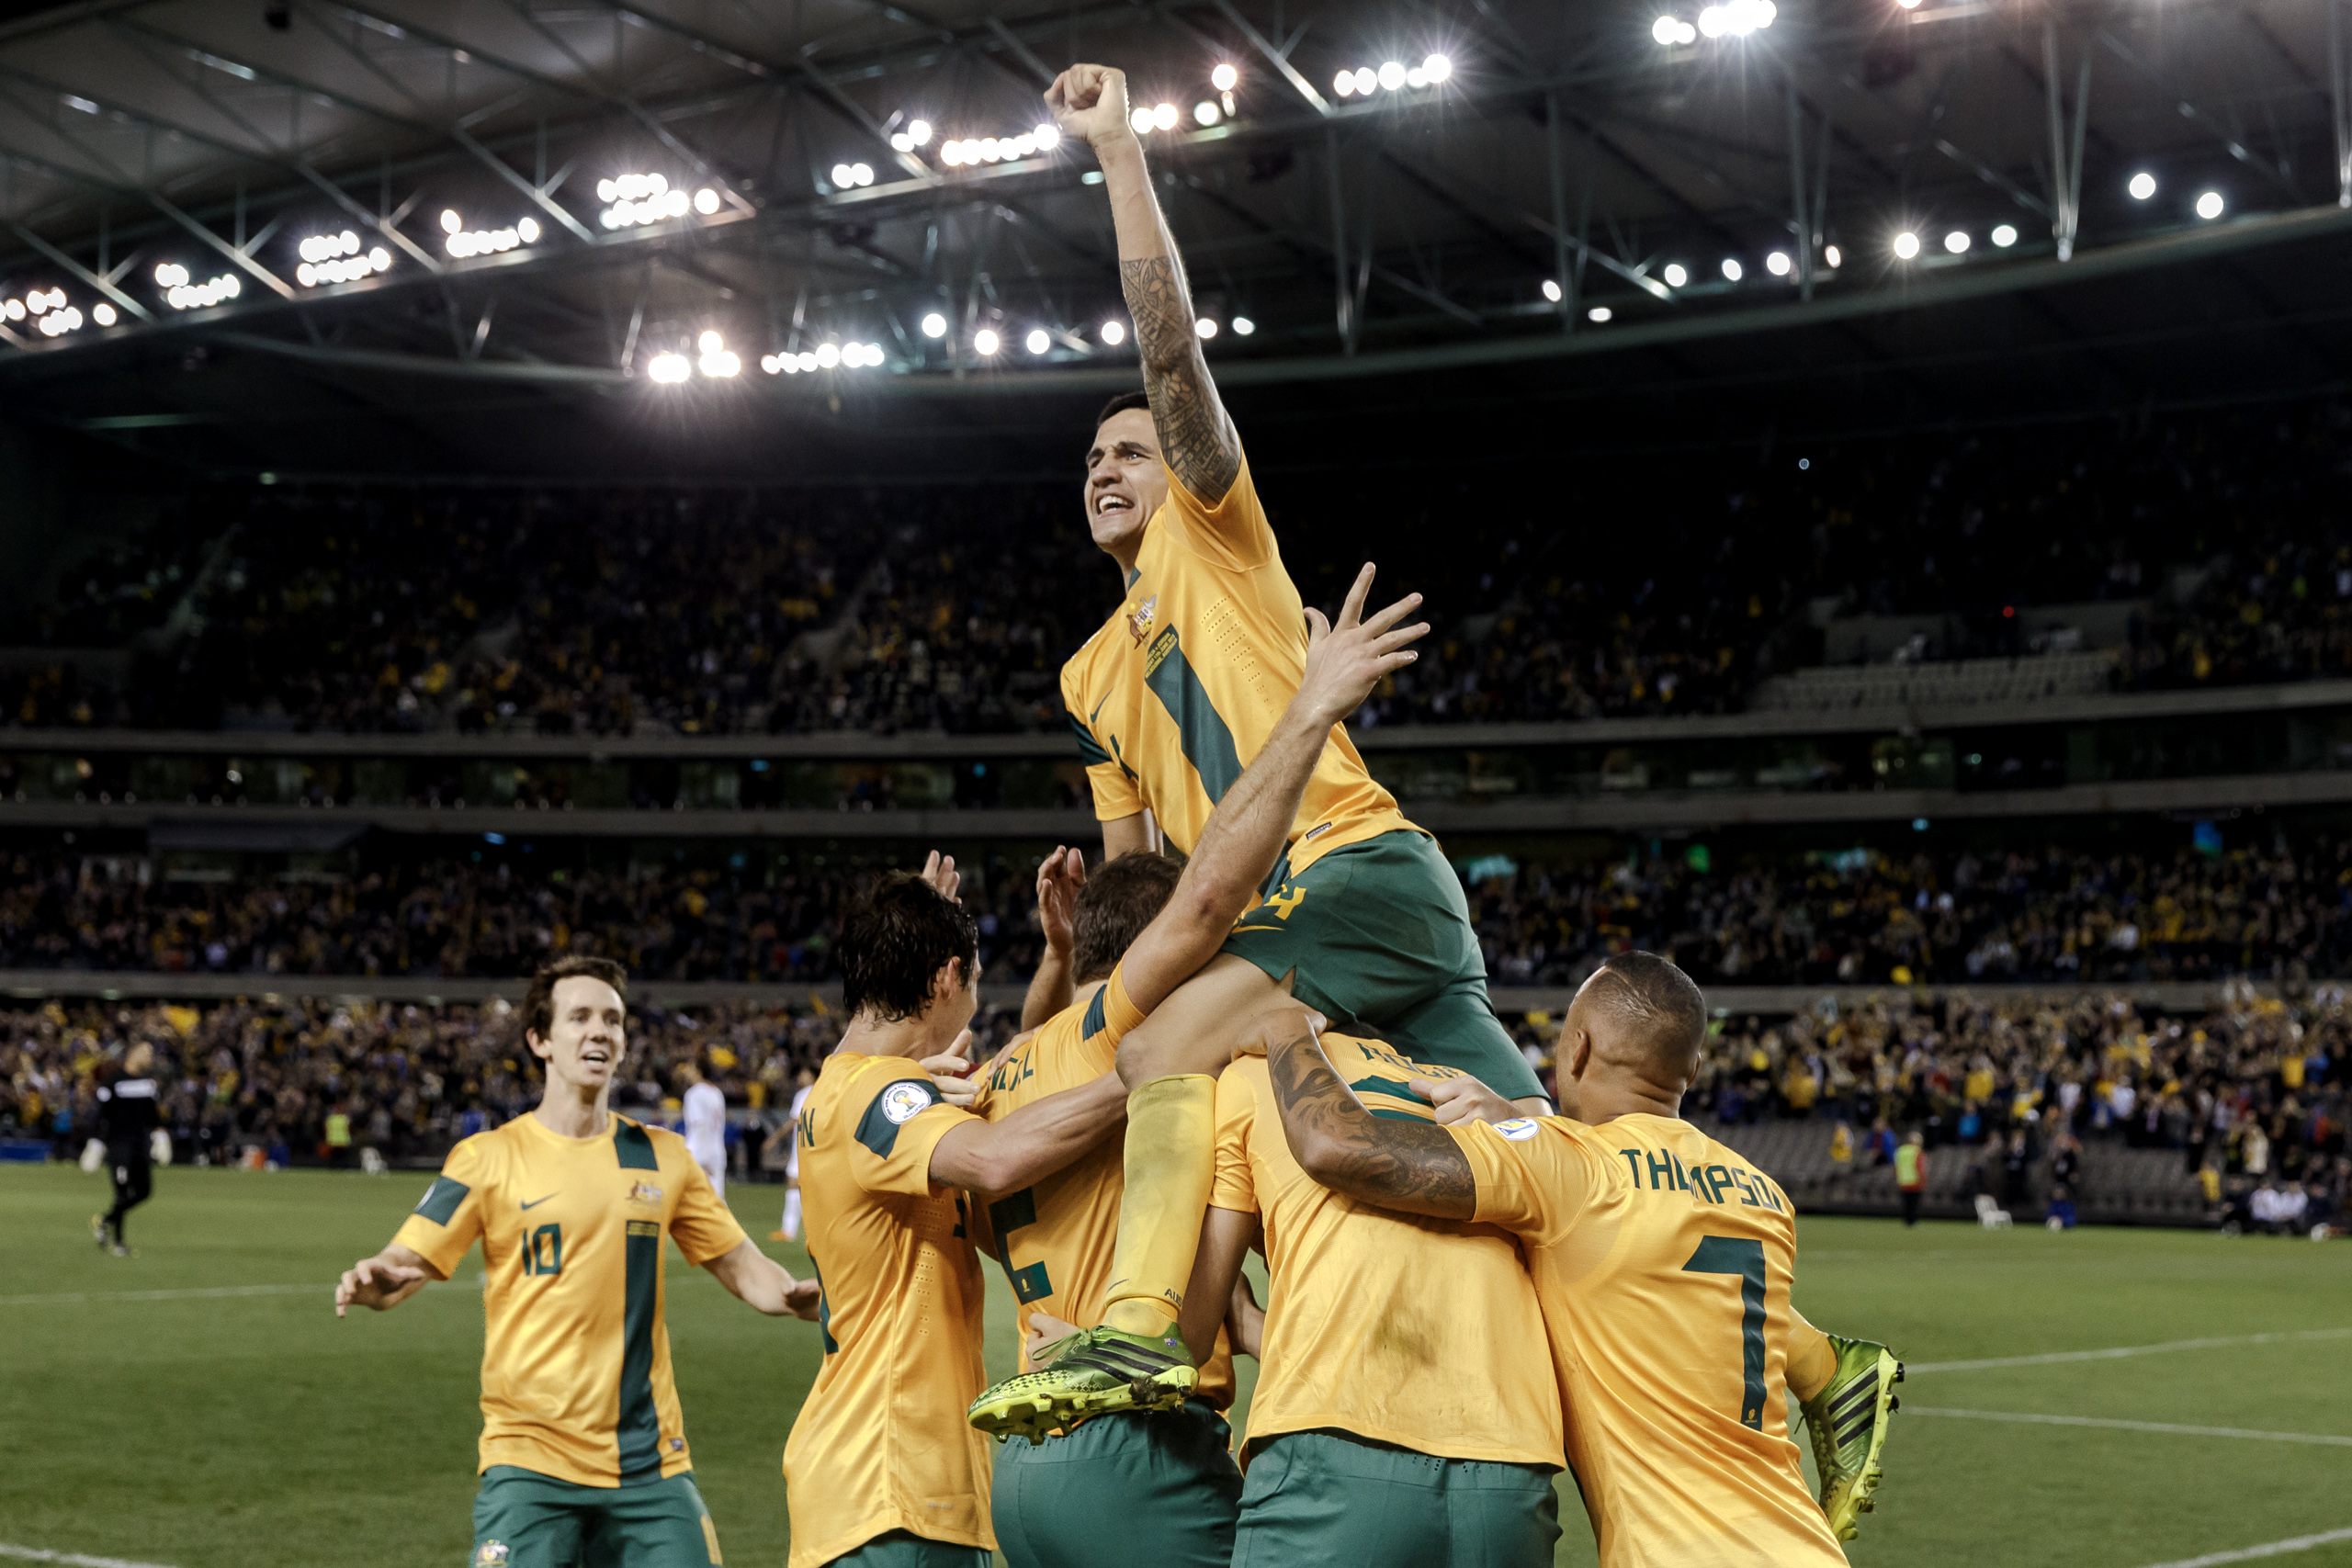 MELBOURNE, 11 JUNE 2013 - Tim CAHILL of Australia celebrates the goal of Lucas NEILL in a Round 4 FIFA 2014 World Cup qualifier match between Australia and Jordan at Etihad Stadium, Melbourne, Australia. 20130611_SYX9586